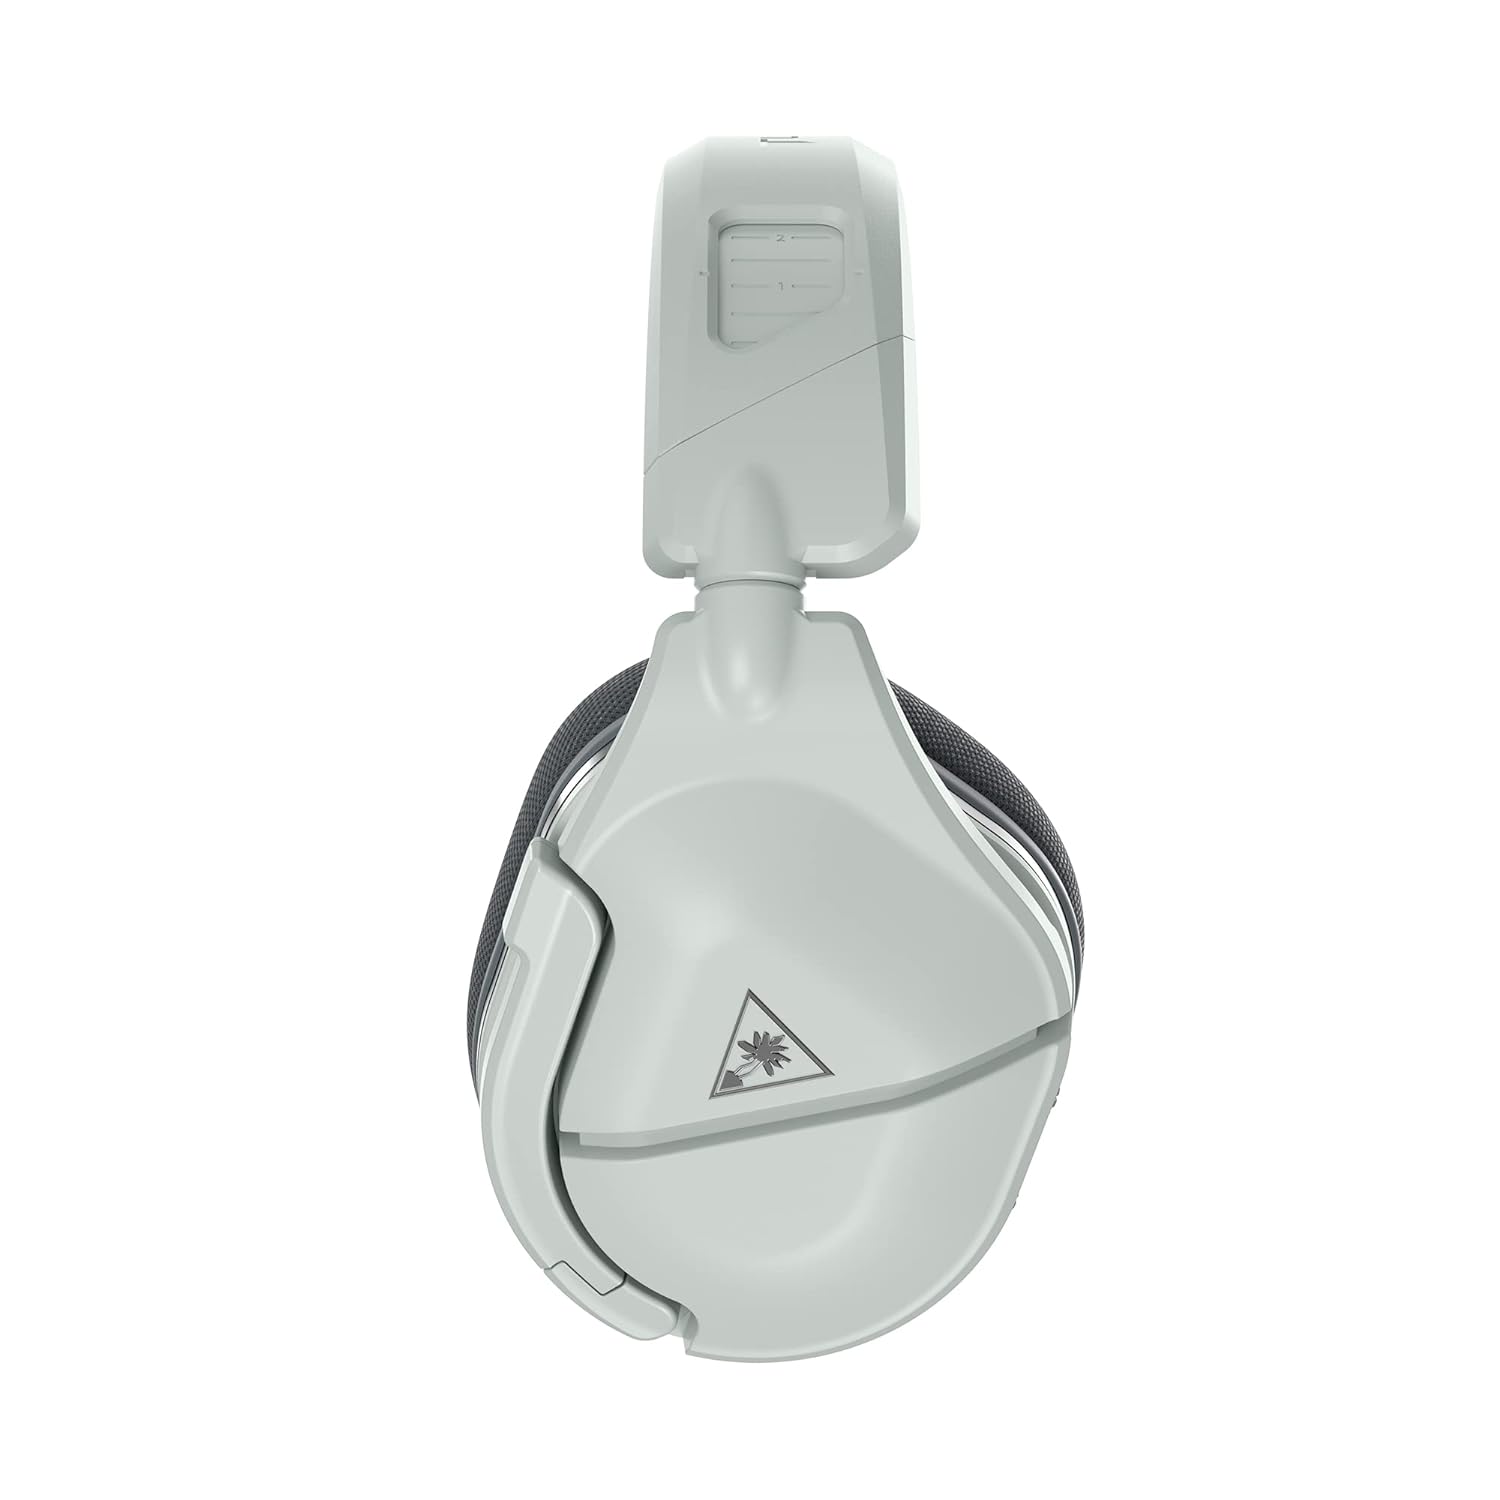 Turtle Beach Stealth 600 Gen2 USB Wireless Headset for Xbox - White/Silver (New)